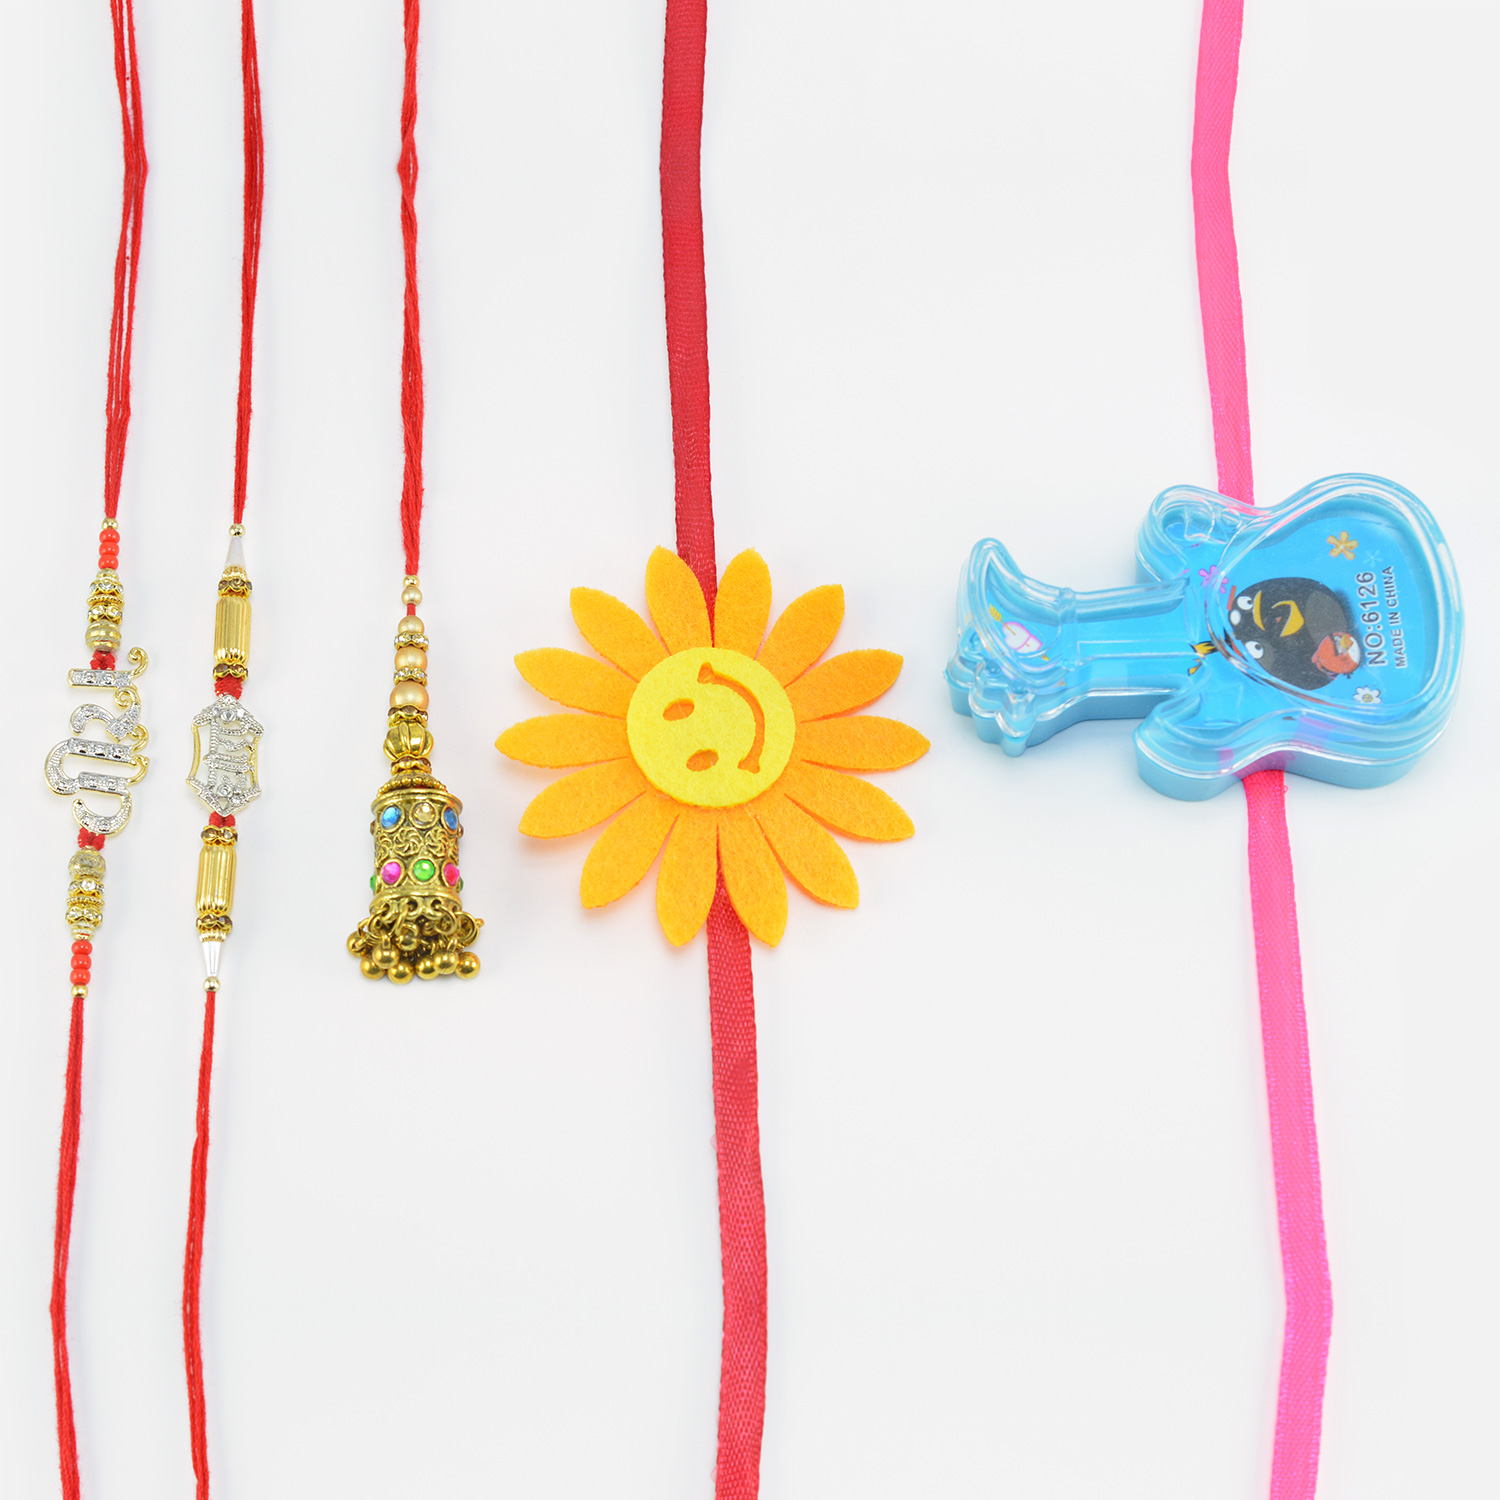 Veera Written Two Sikh Rakhis for Brothers with Two Toy Guitar and Flower Kids Rakhi and One Lumba Rakhi